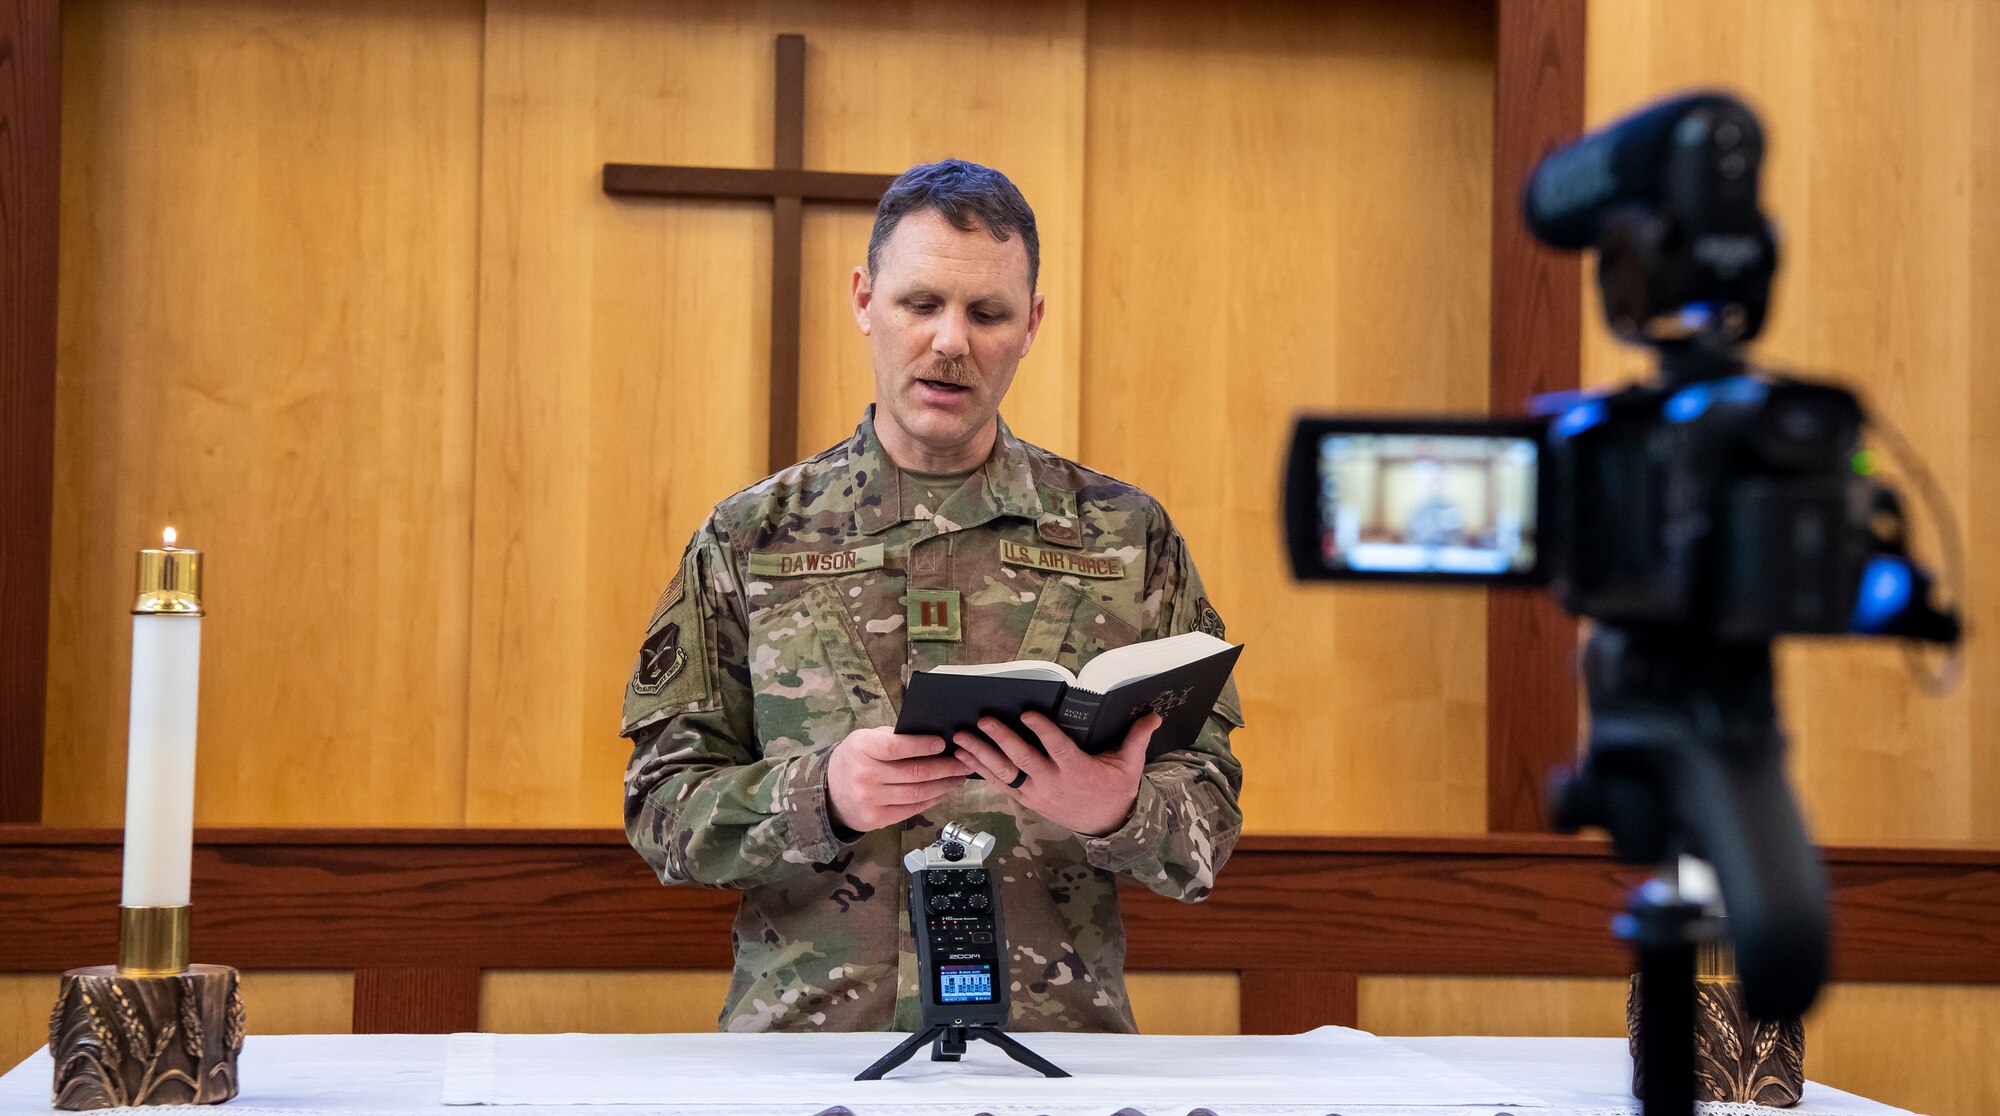 Chaplain (Capt.) Jonathan Dawson, 436th Airlift Wing chaplain, speaks during a service recording April 25, 2020, at Chapel 1 on Dover Air Force Base, Delaware. The recordings are created during the week and aired on Sunday due to COVID-19 restrictions. The recordings allow the chapel to provide services while ensuring people's safety. (U.S. Air Force photo by Senior Airman Christopher Quail)